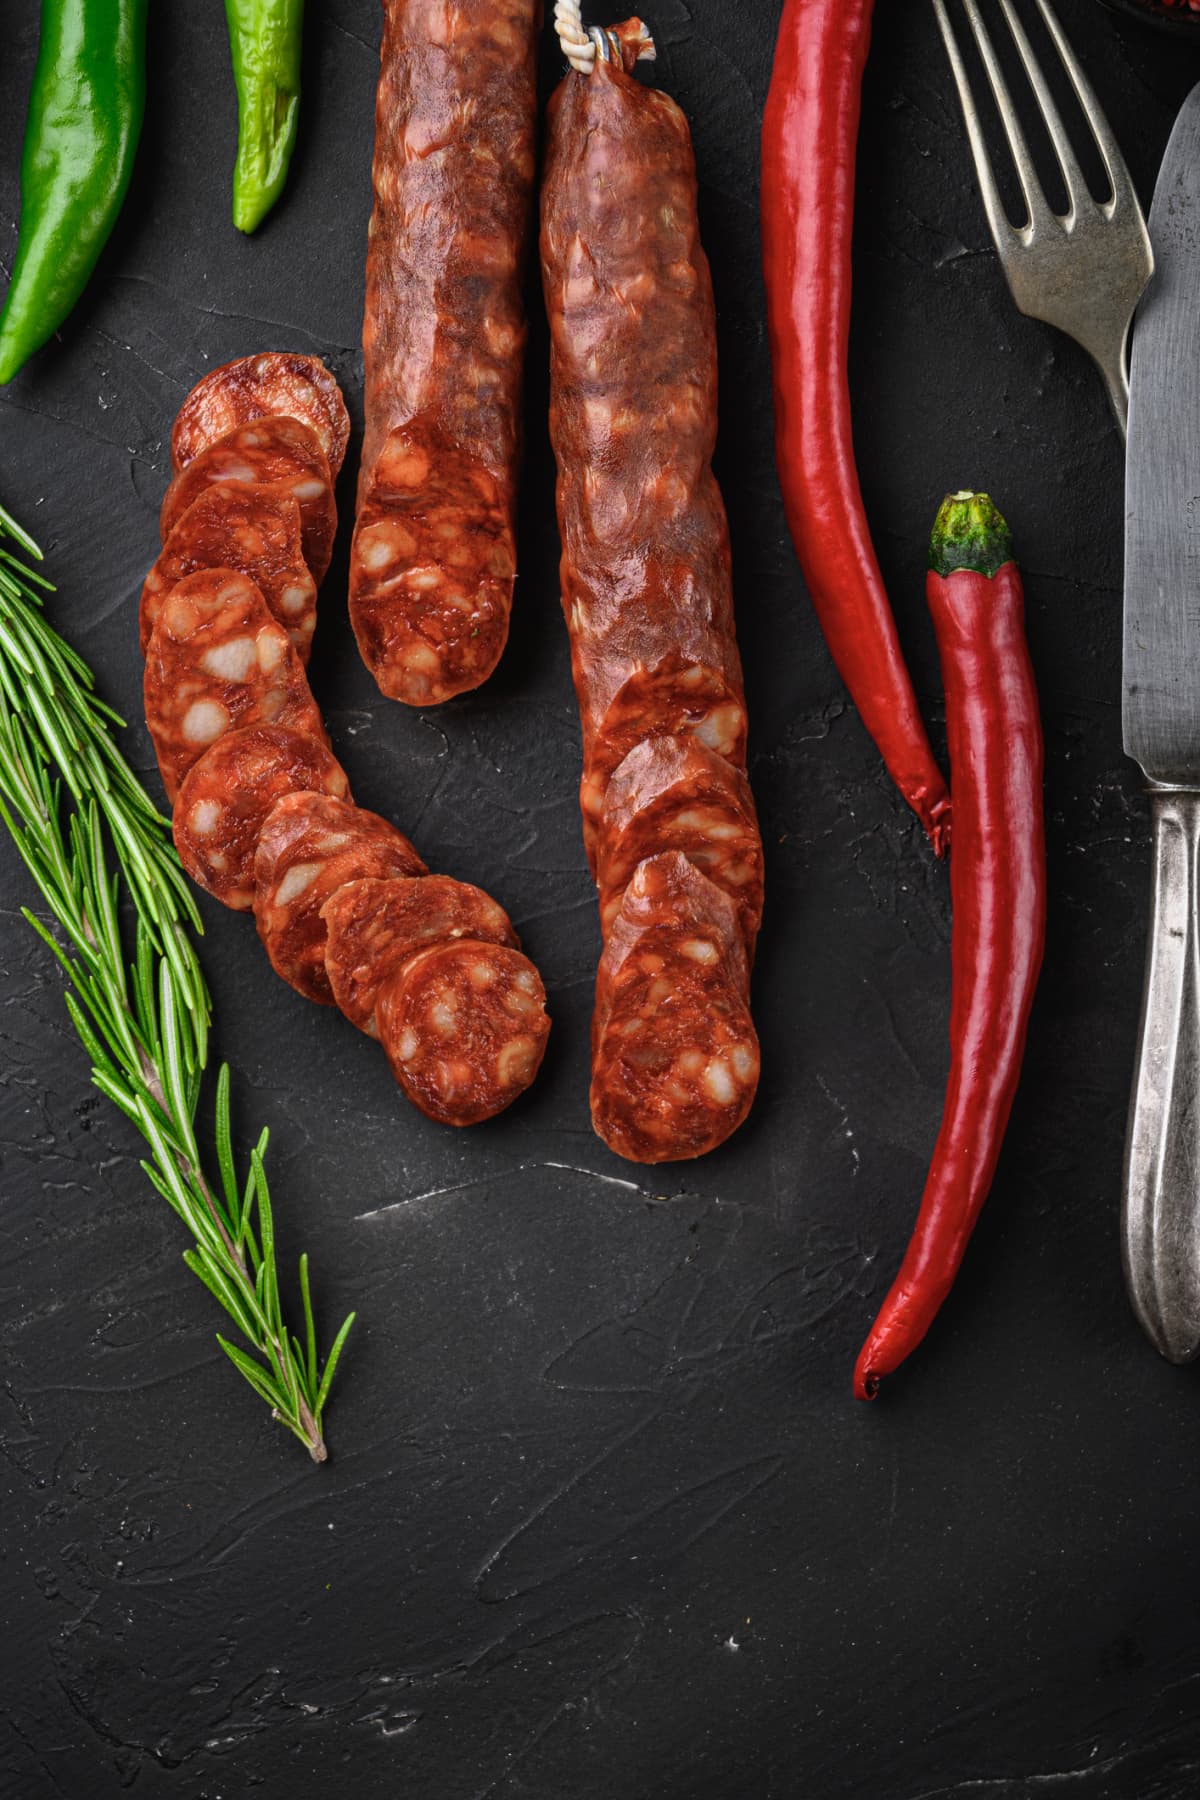 Spanish chorizo sausages with peppers and rosemary